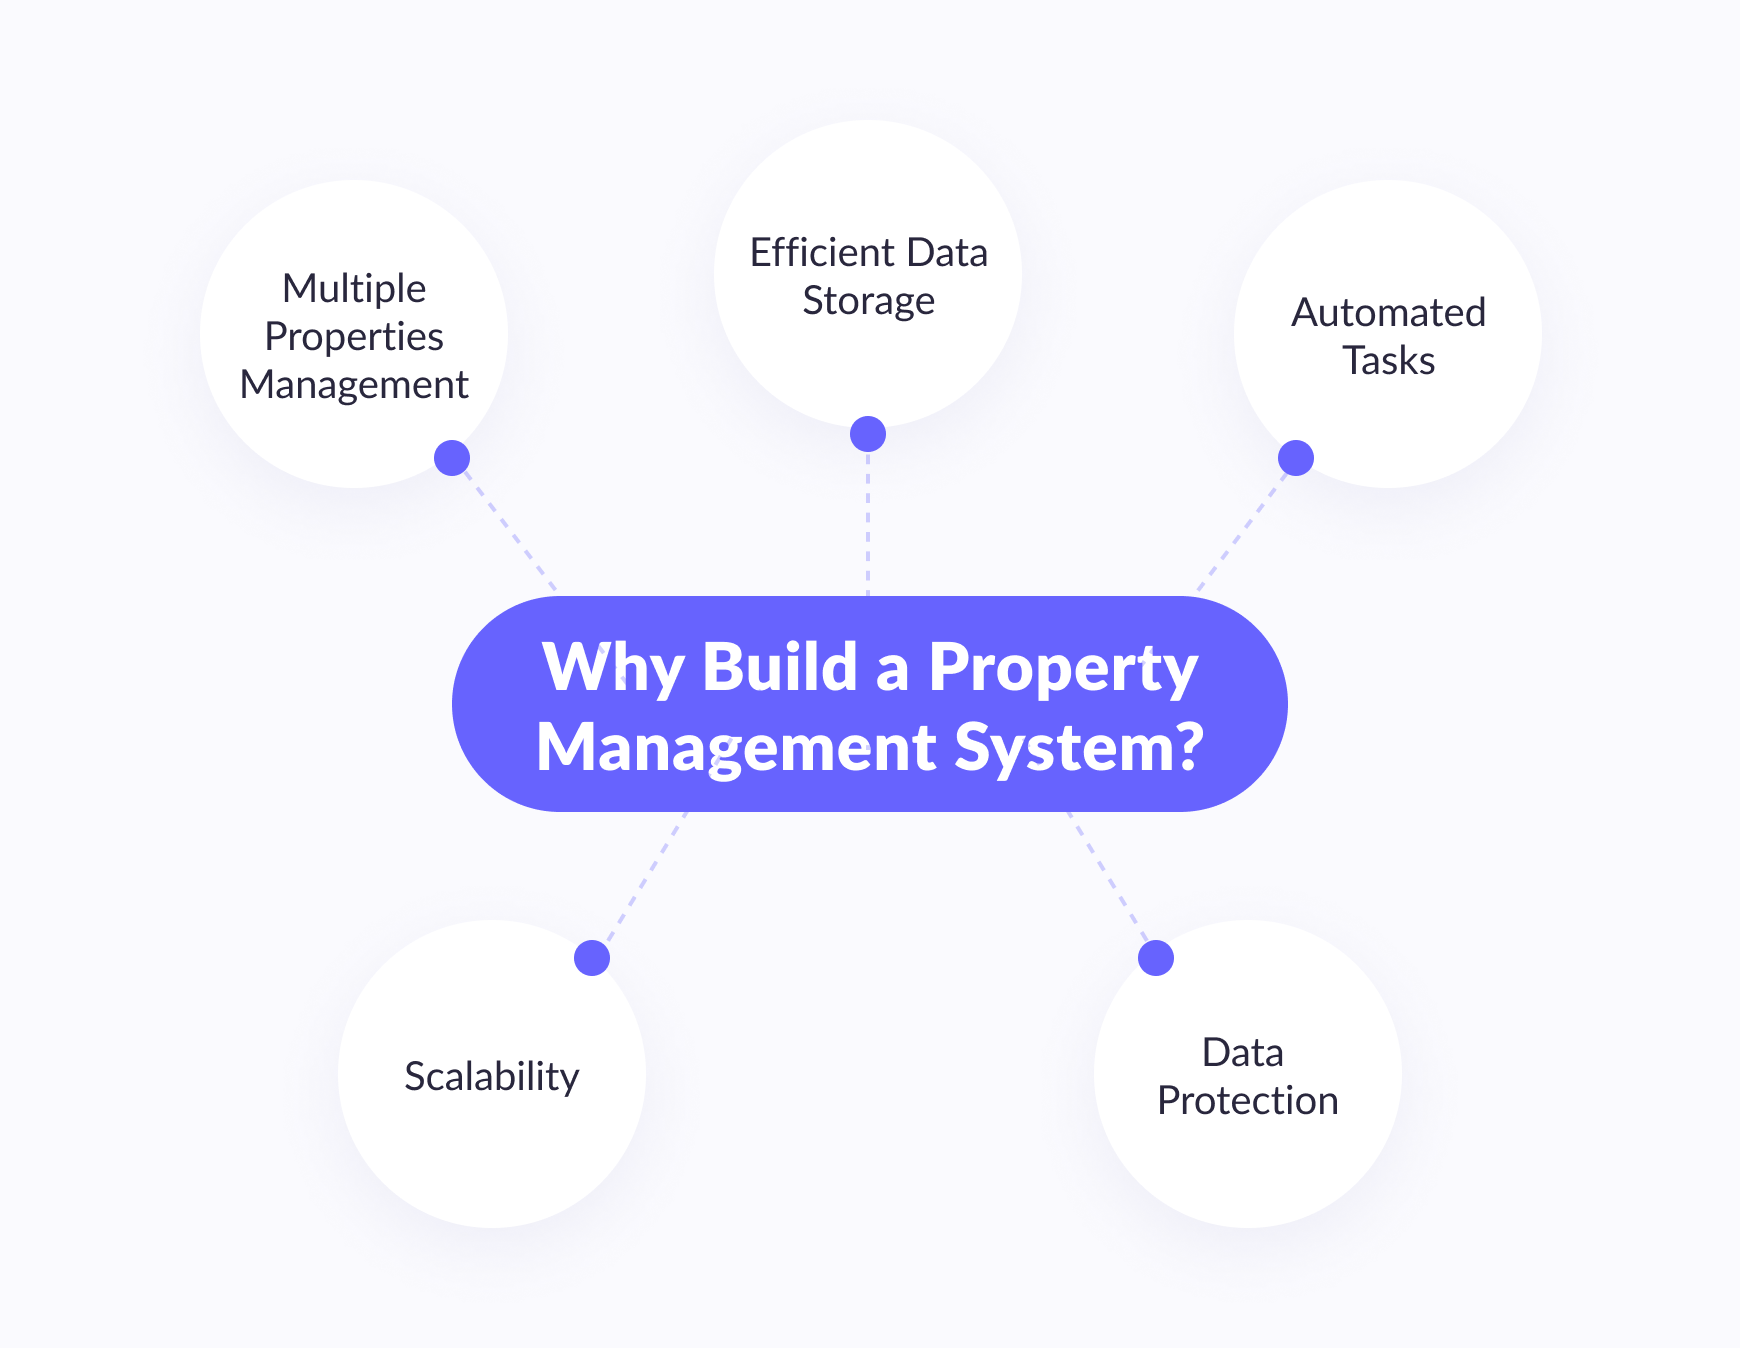 Why do you need to build a property management system?